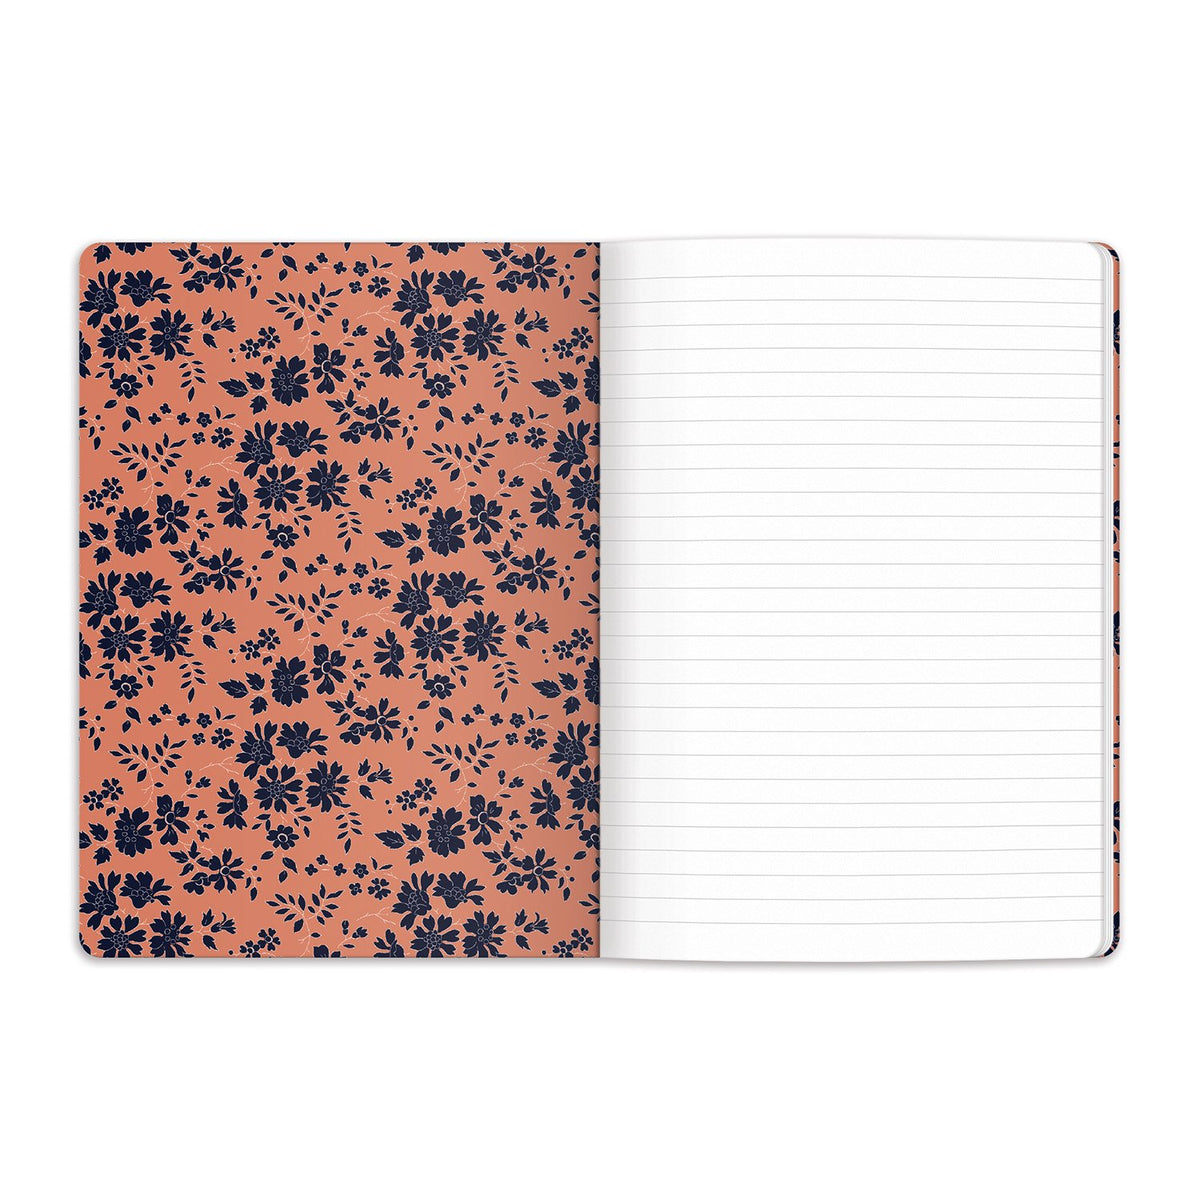 liberty-london-floral-writers-notebook-set-journals-and-notebooks-liberty-london-collection-886657